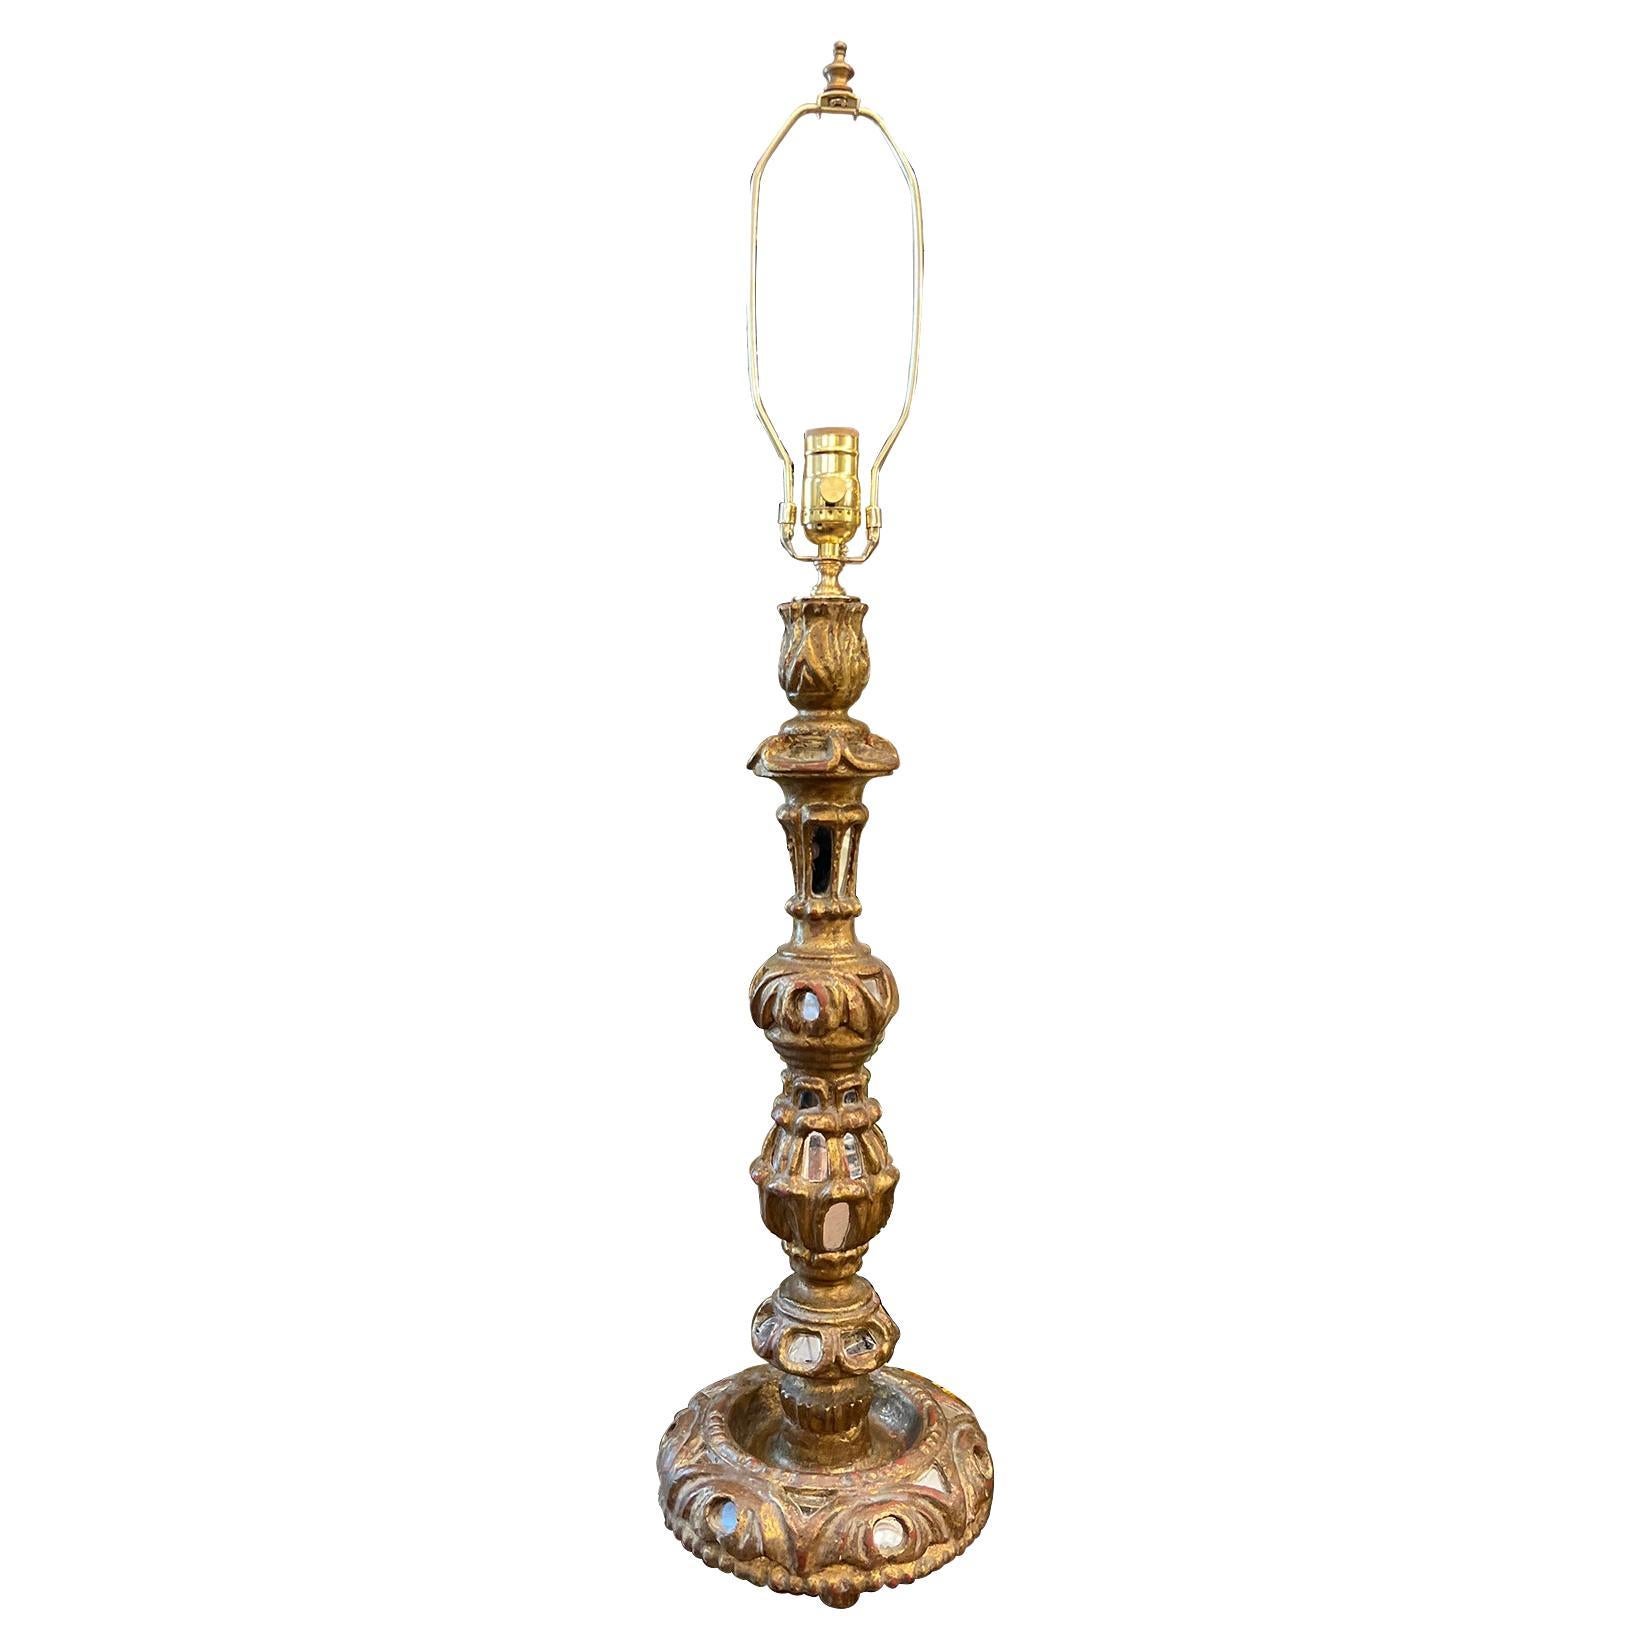 Antique Candlestick Lamp For Sale